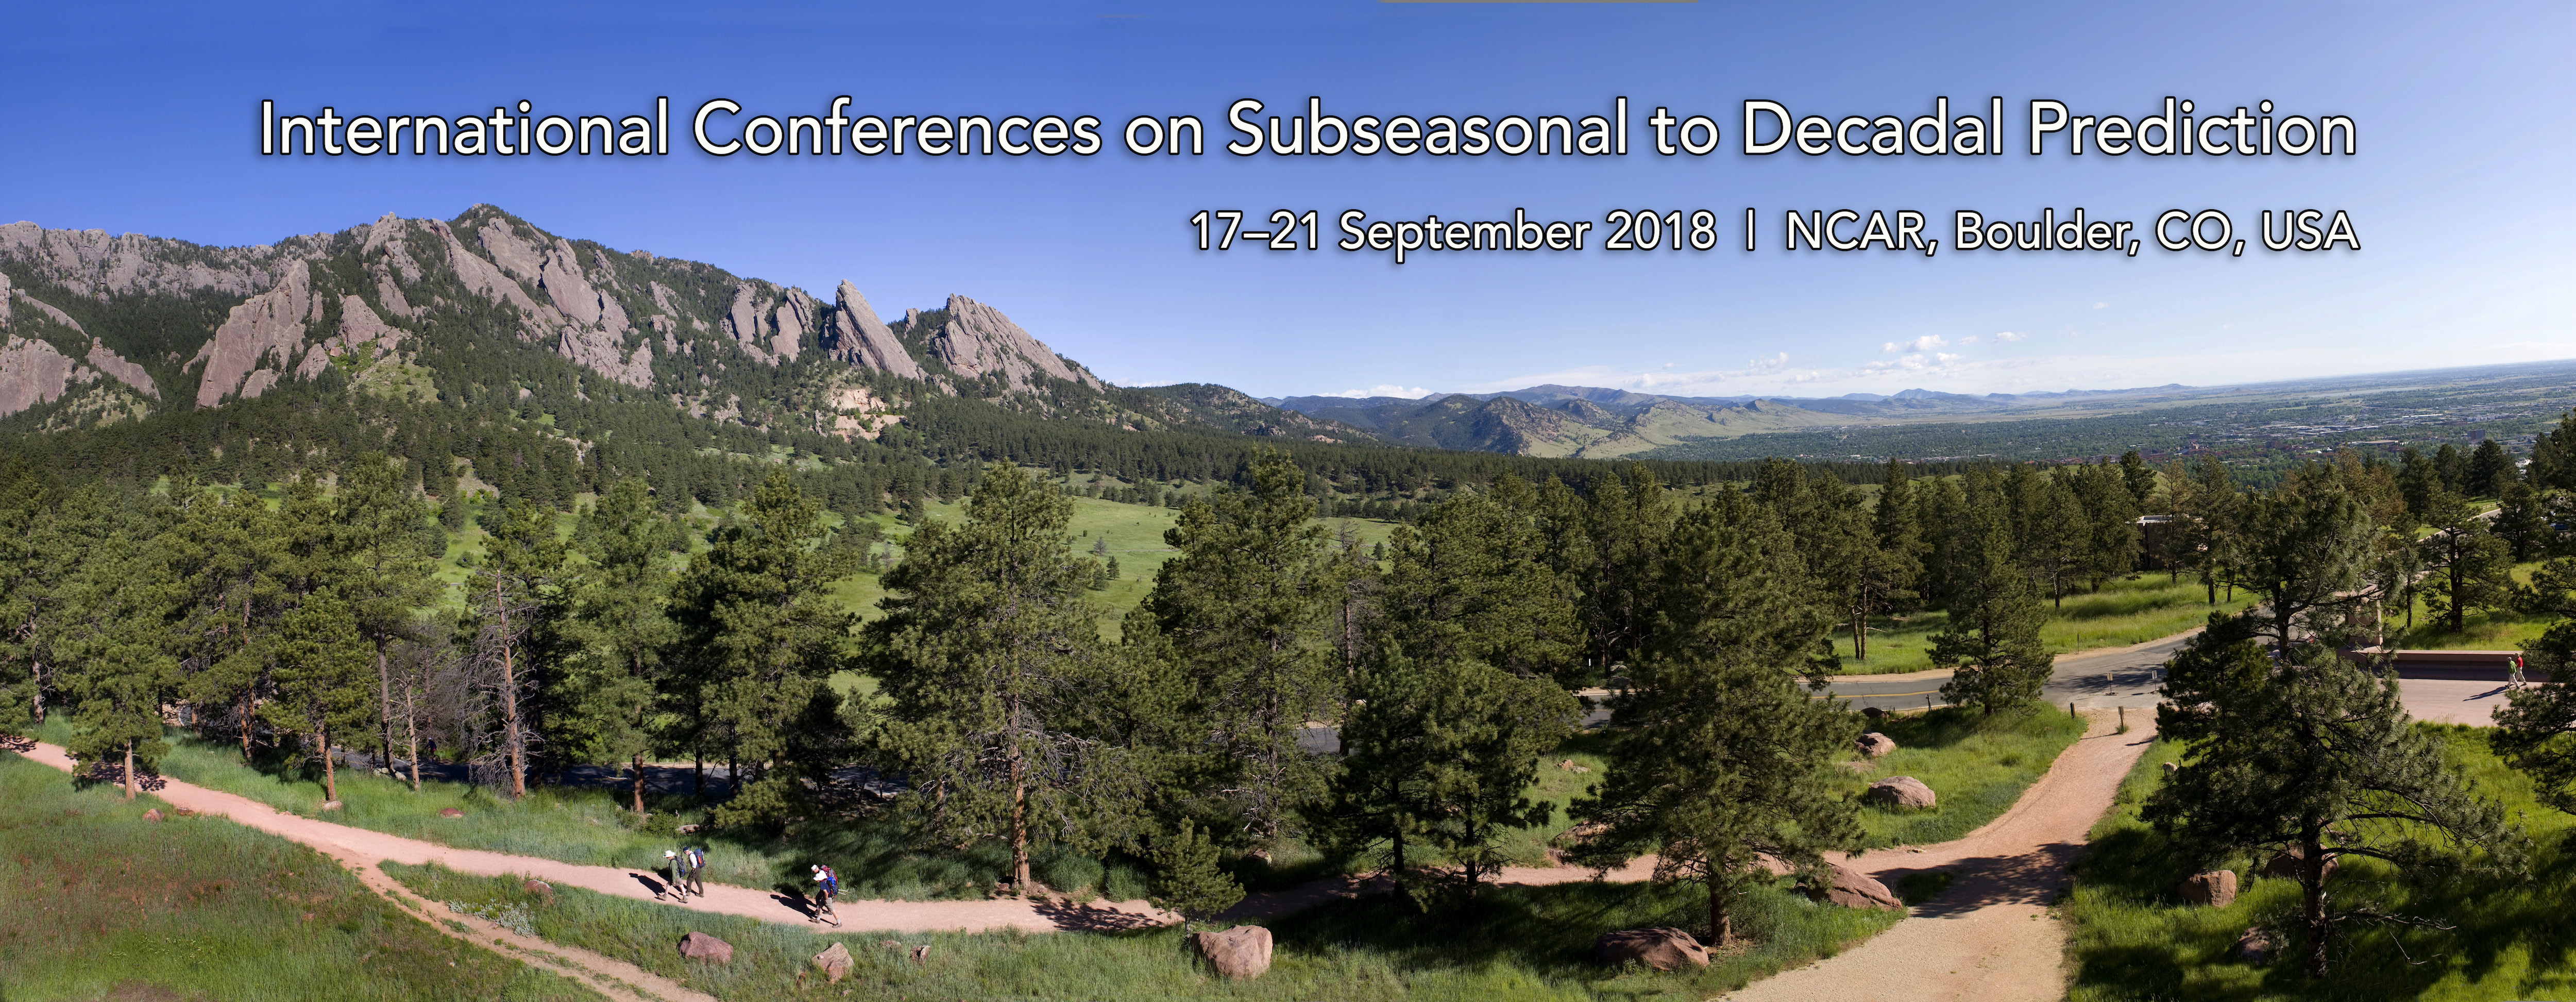 S2D conference banner 2